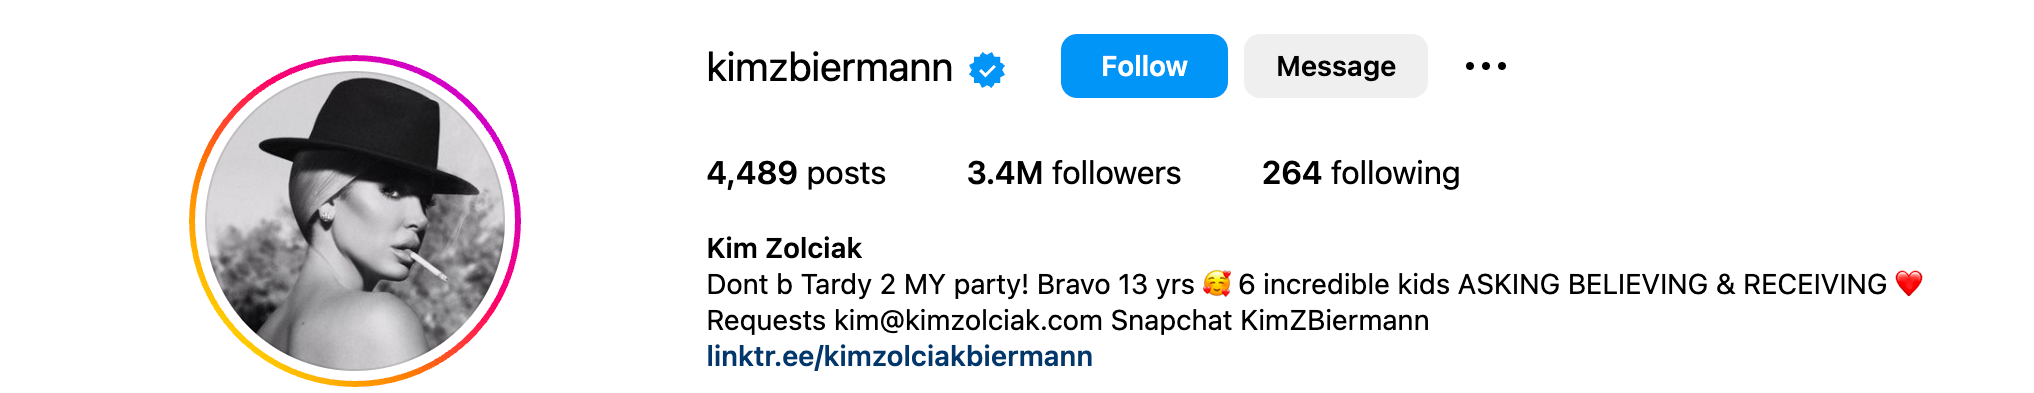 Kim Zolciak Is Officially A Biermann Again, Post Honest Message About Her Marriage